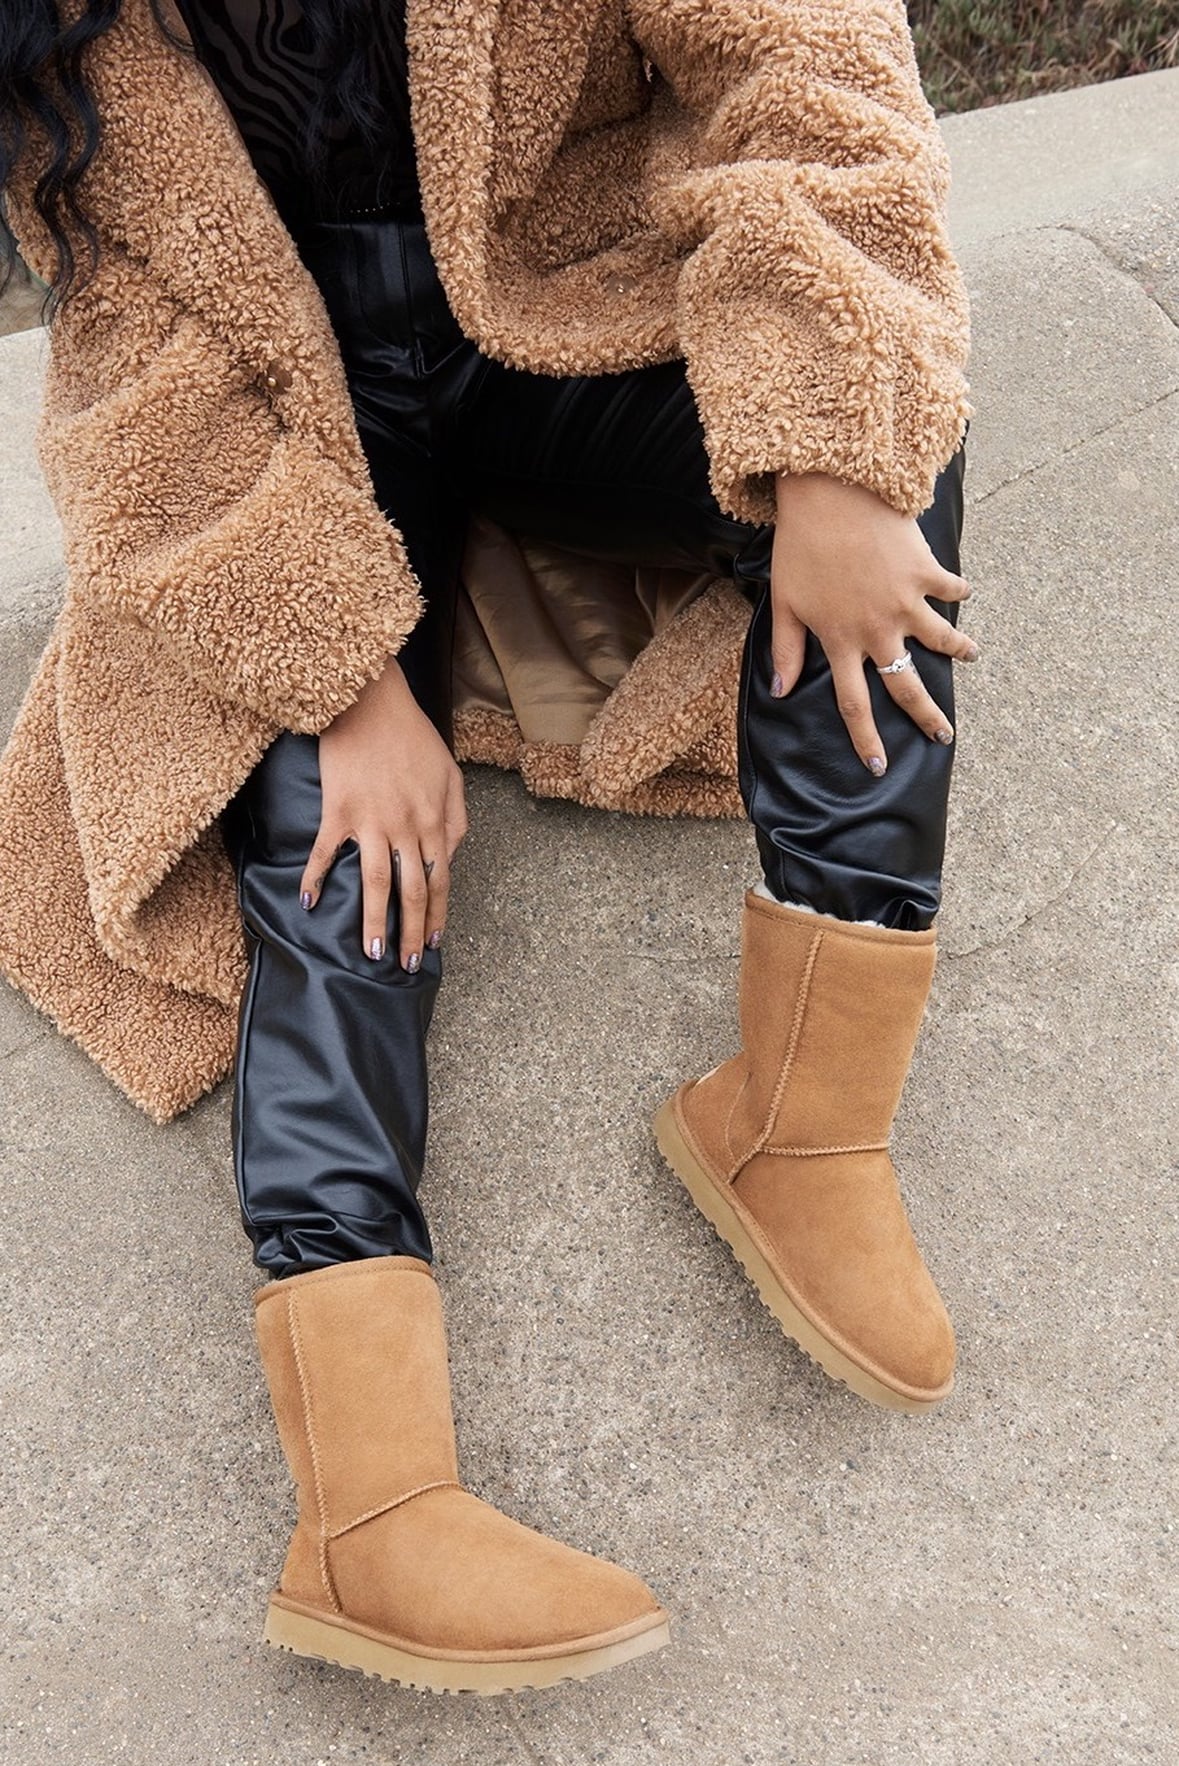 Best Cyber Monday sales on Ugg slippers, boots celebrities love